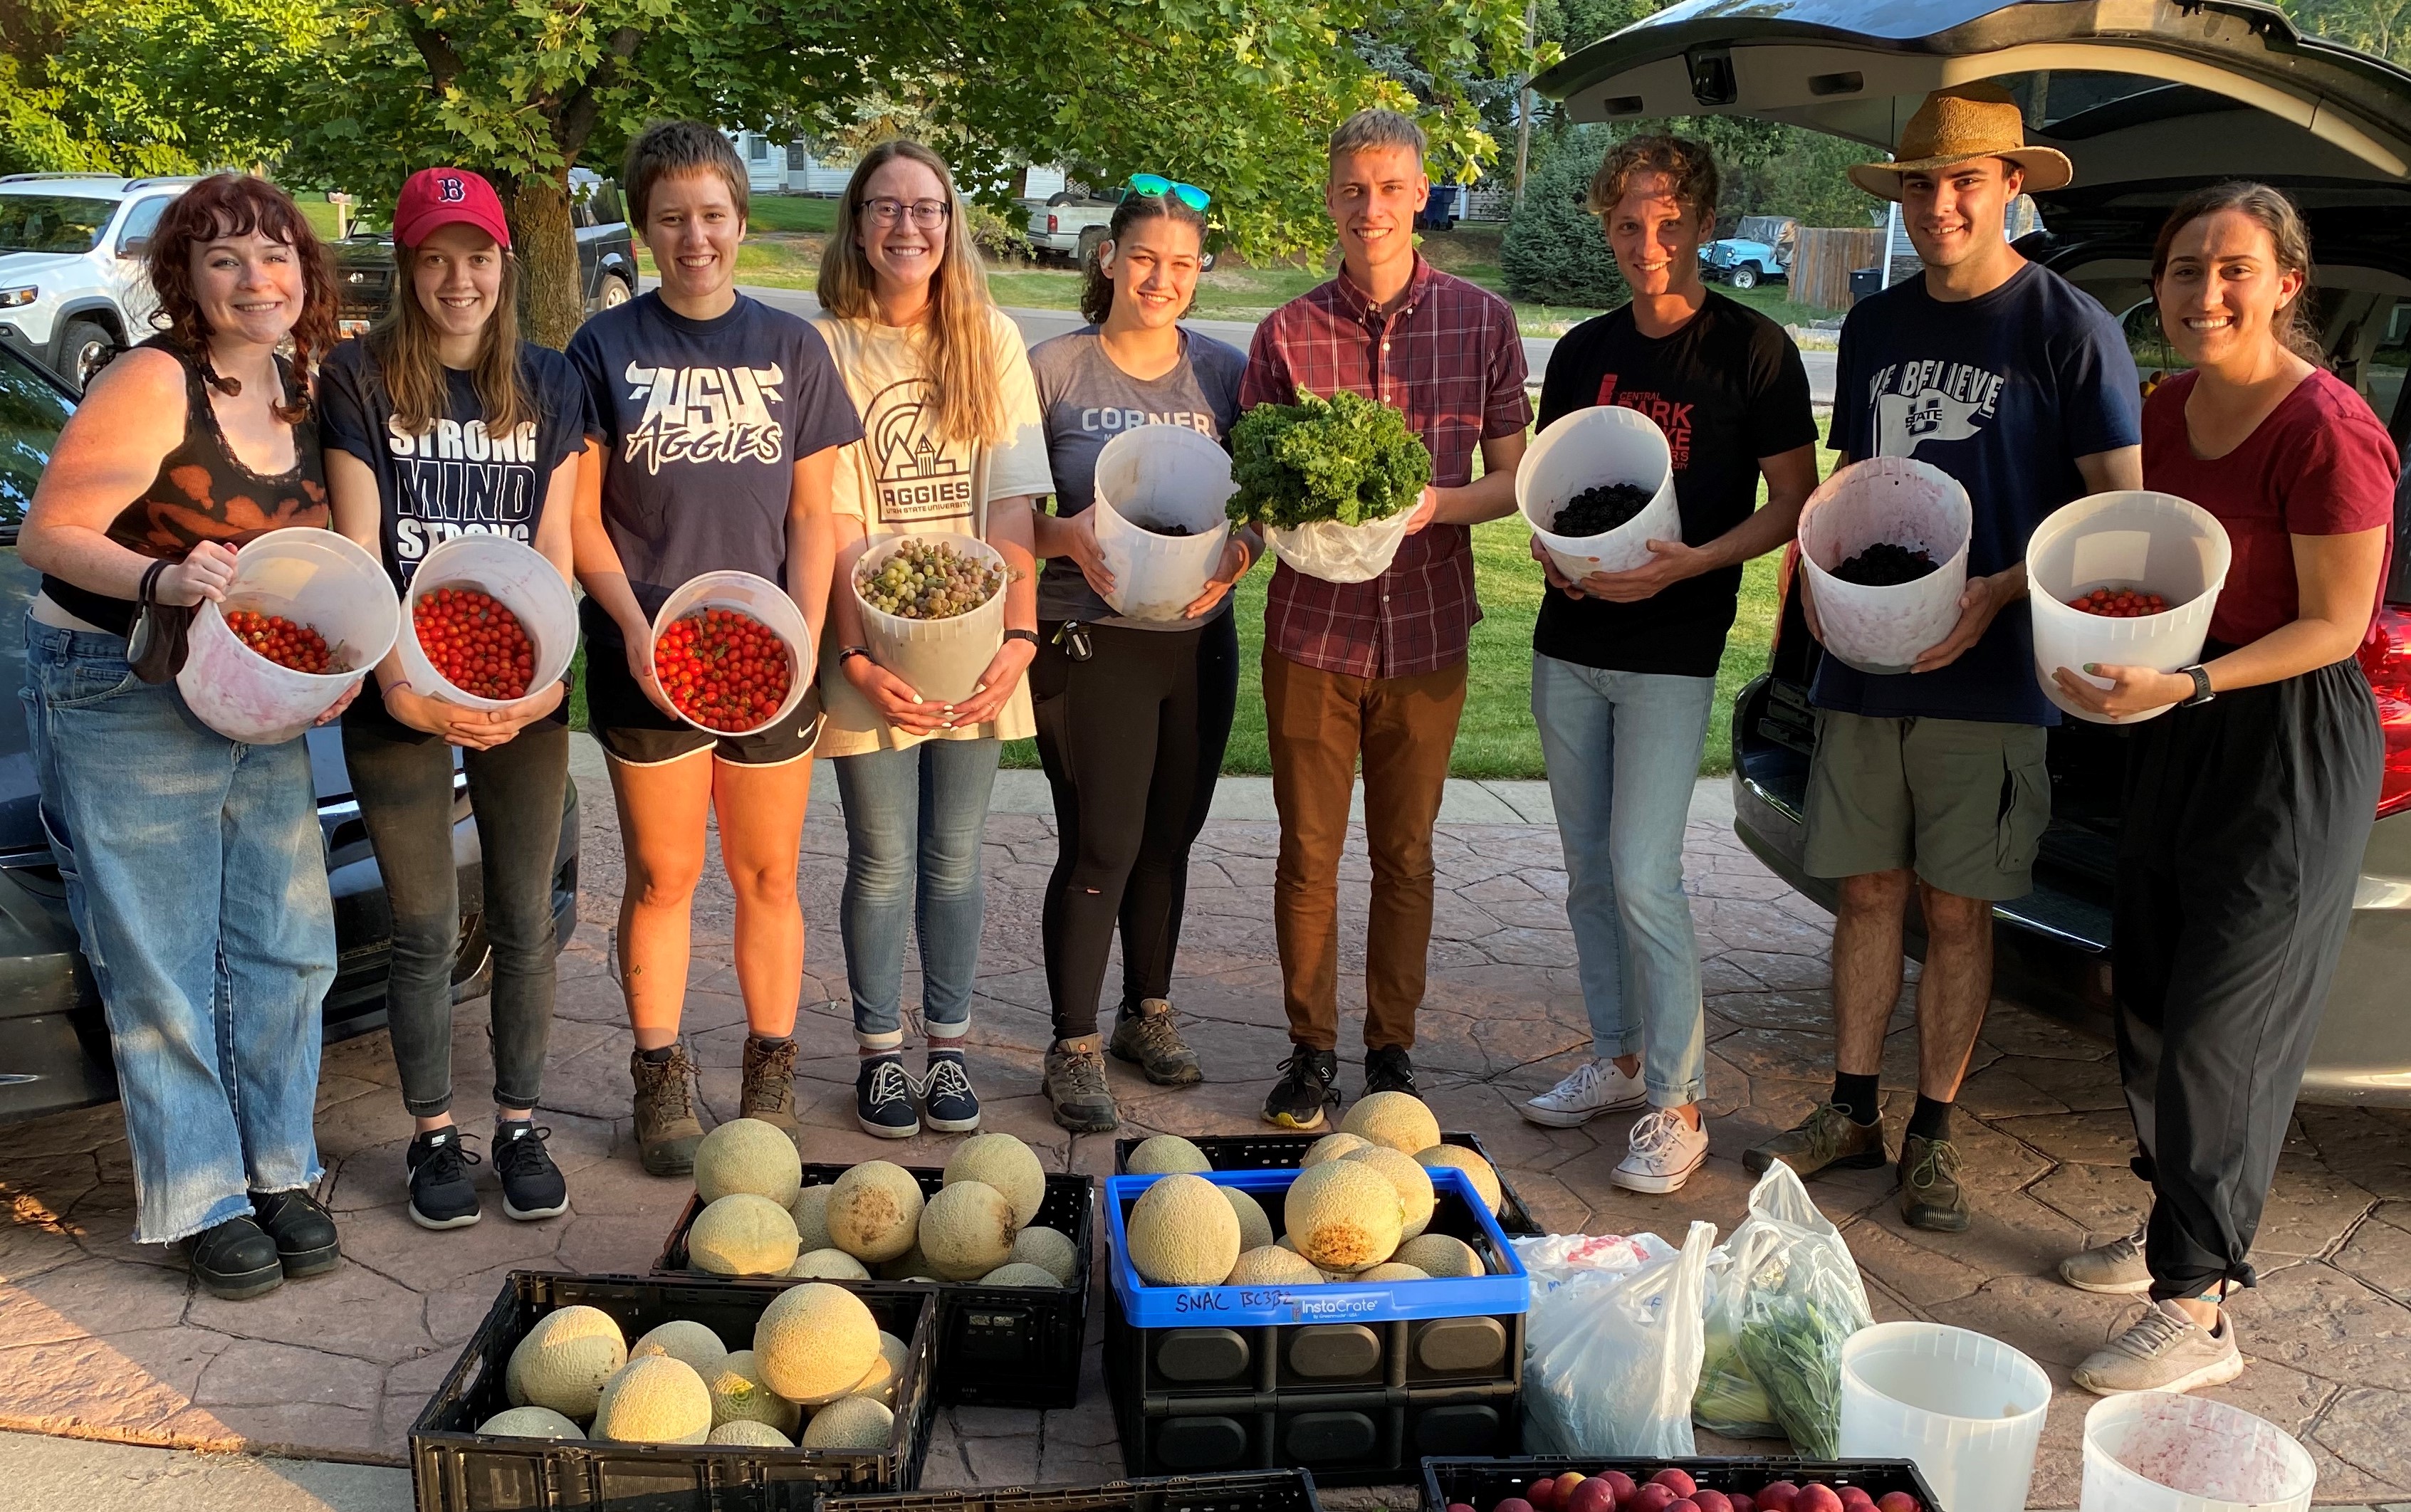 Group of people holding buckets of produce